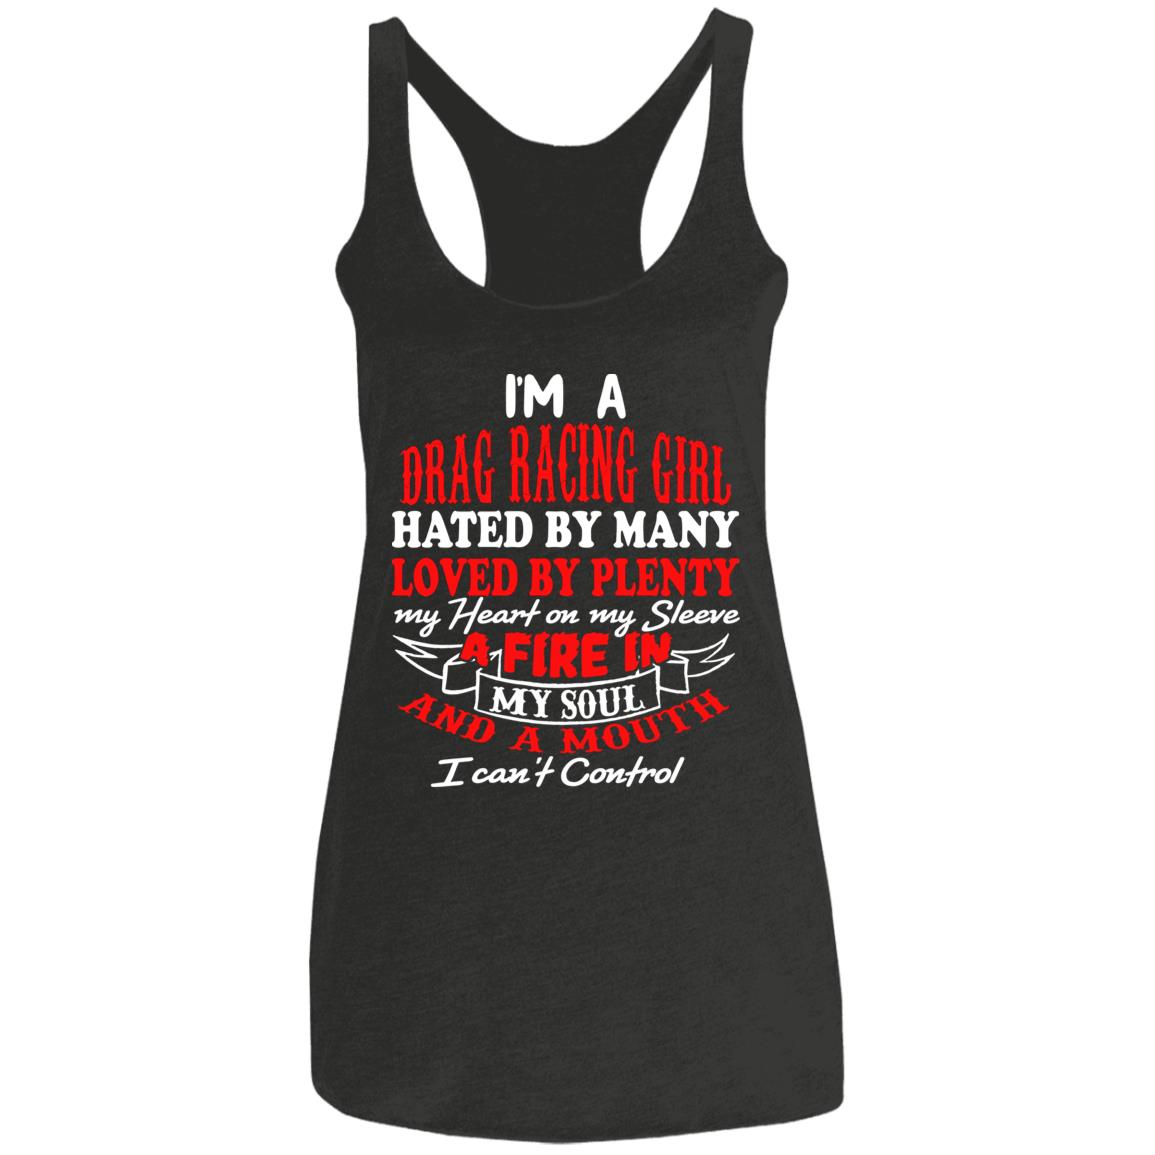 I'm A Drag Racing Girl Hated By Many Loved By Plenty Ladies' Triblend Racerback Tank